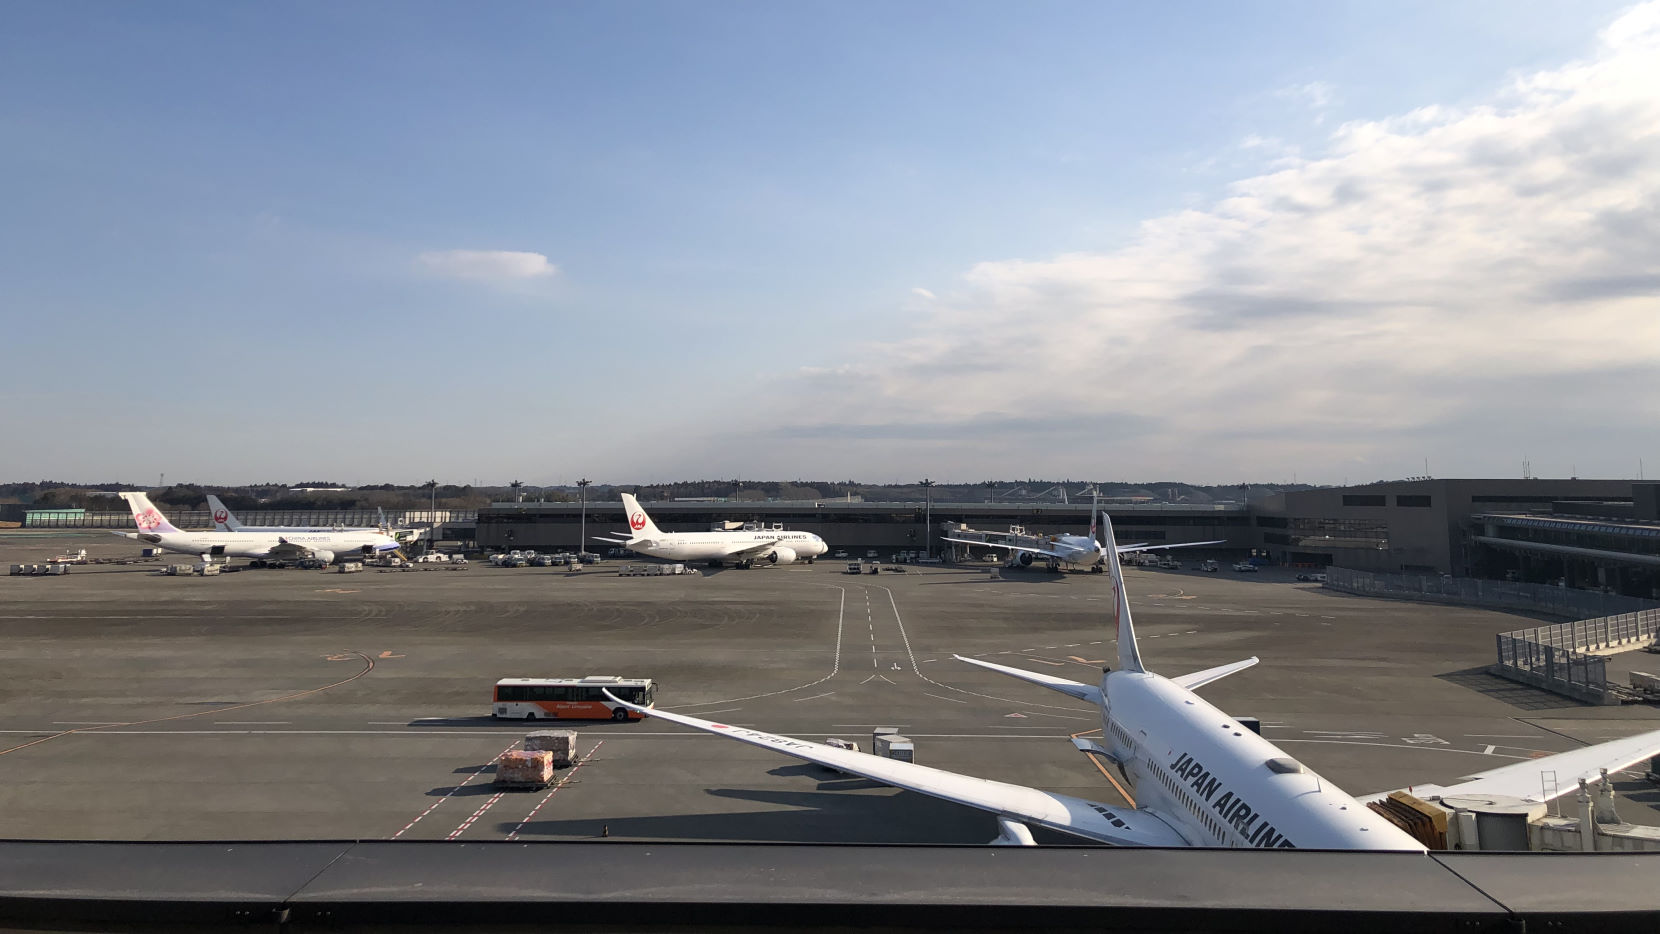 View from the roof of Terminal 2, with multiple Japan Airlines jets parked at gates.